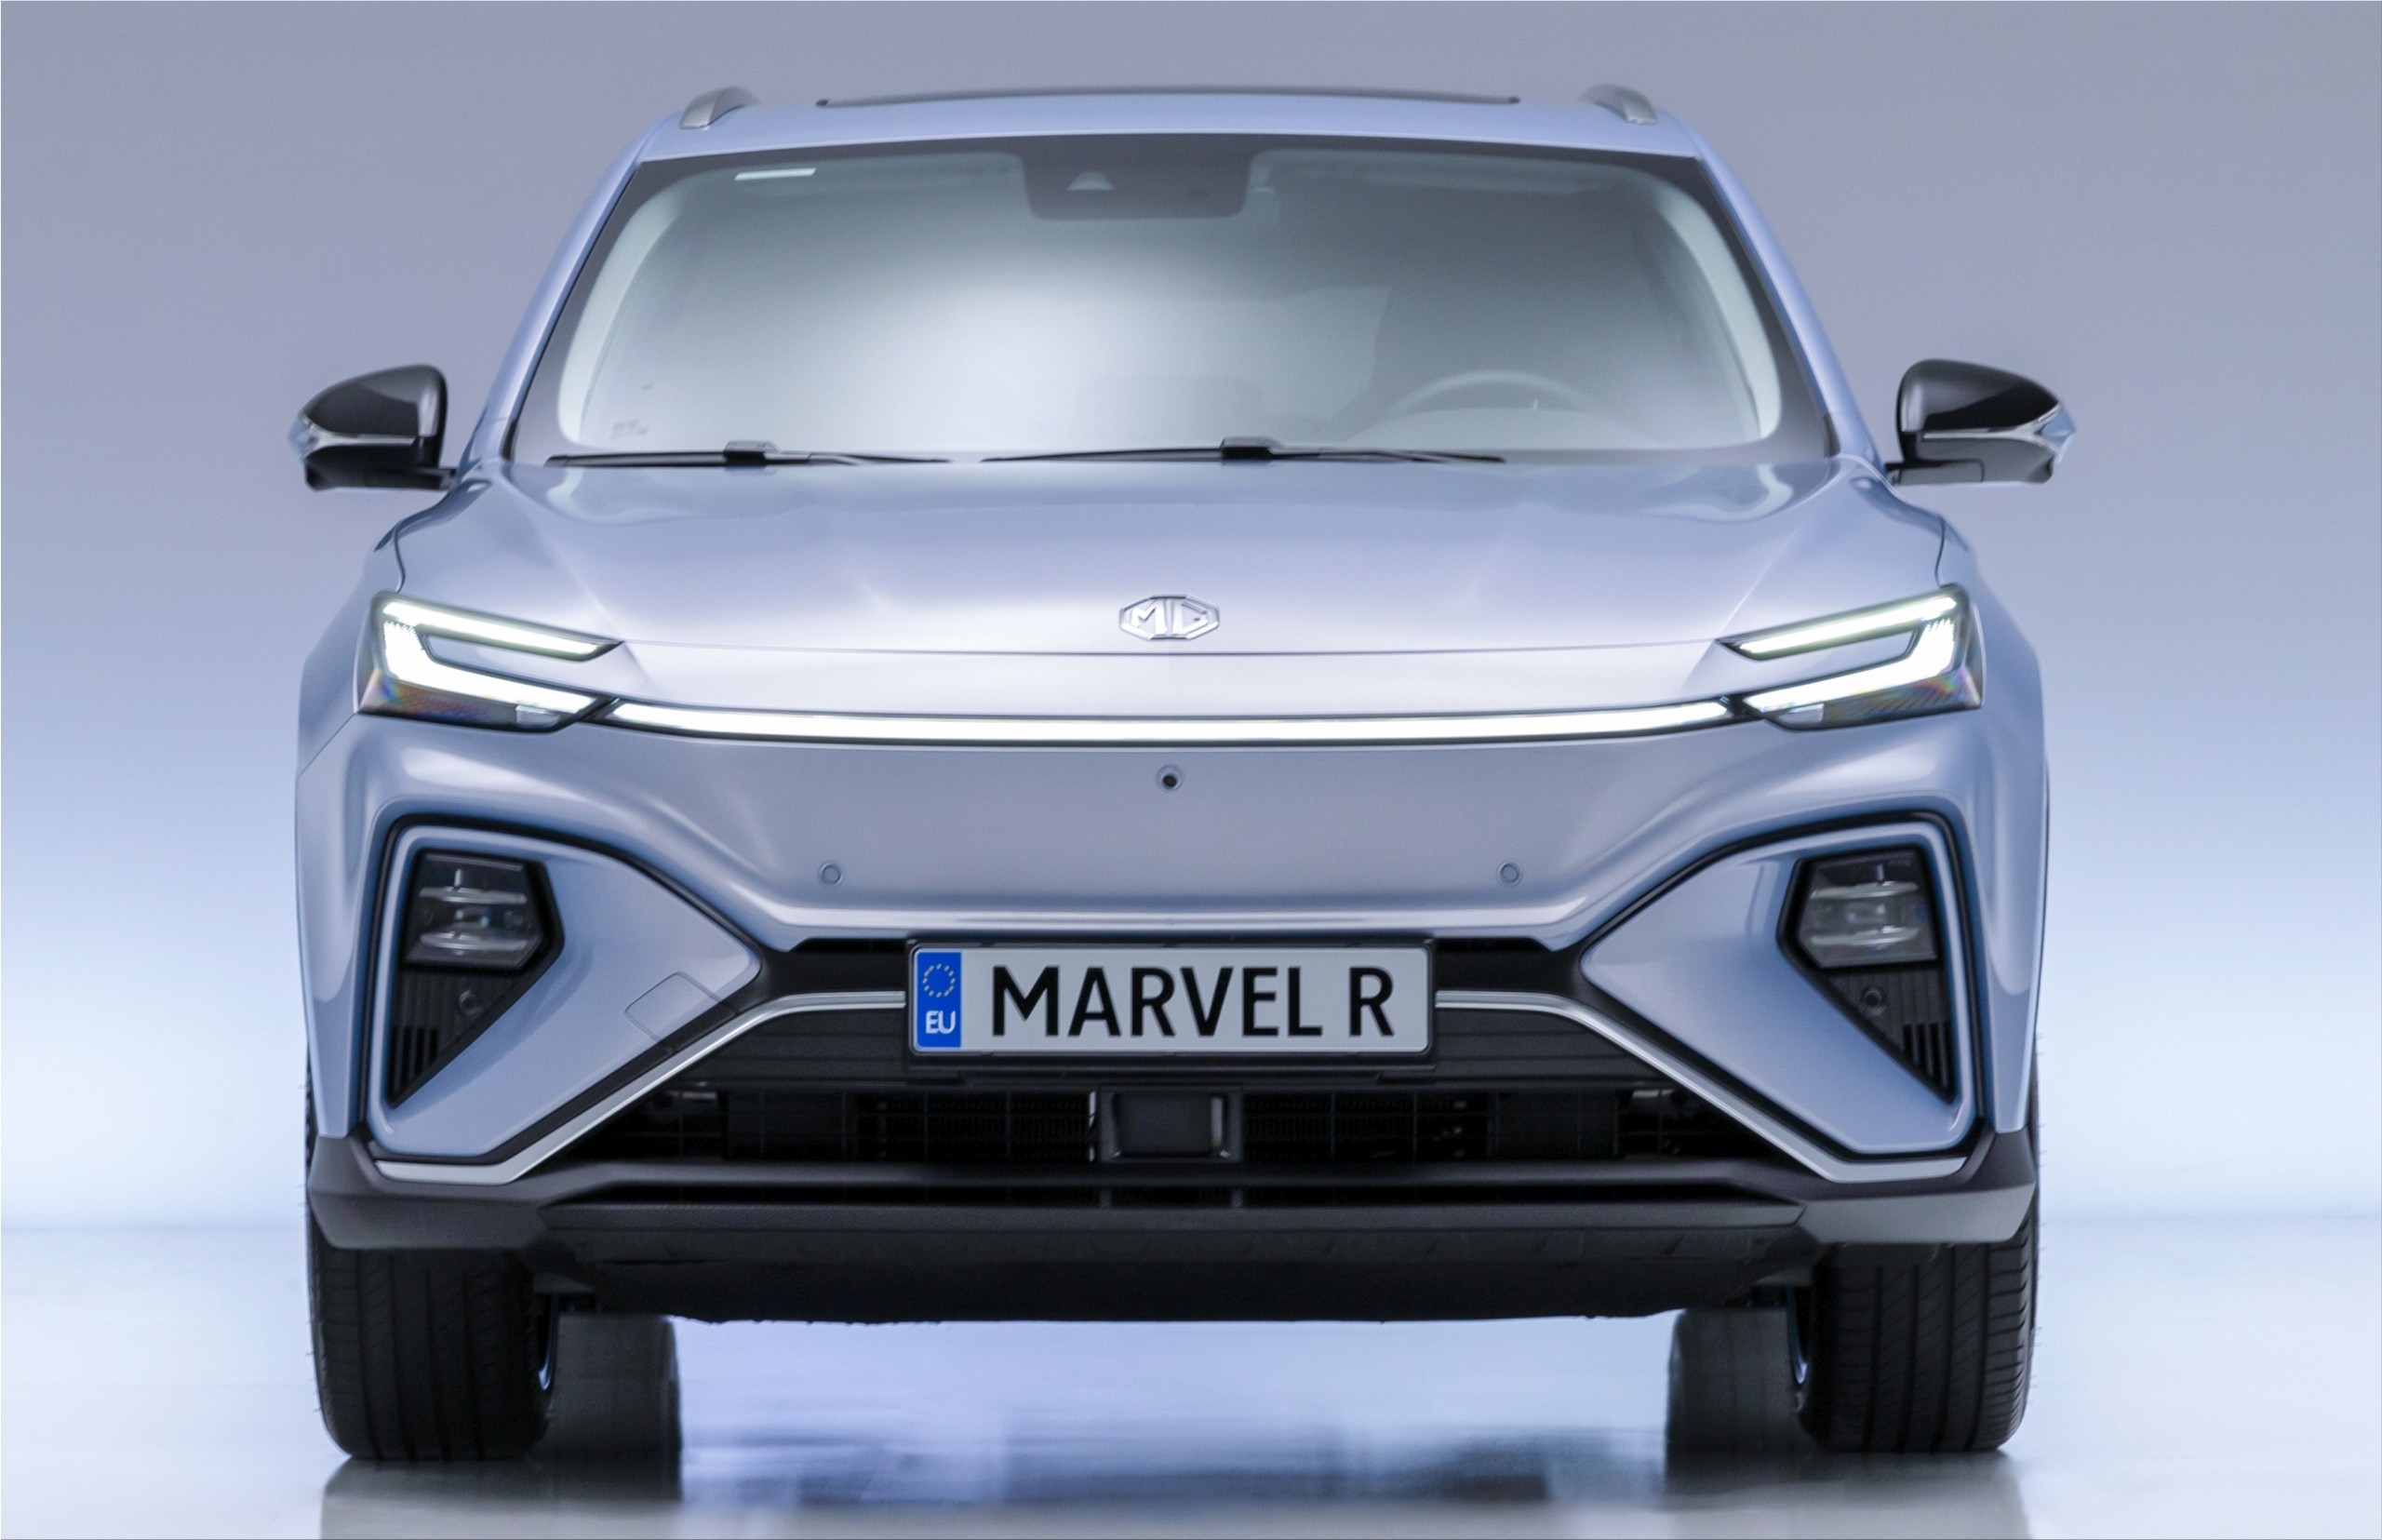 The new MG electric car: Marvel R Electric